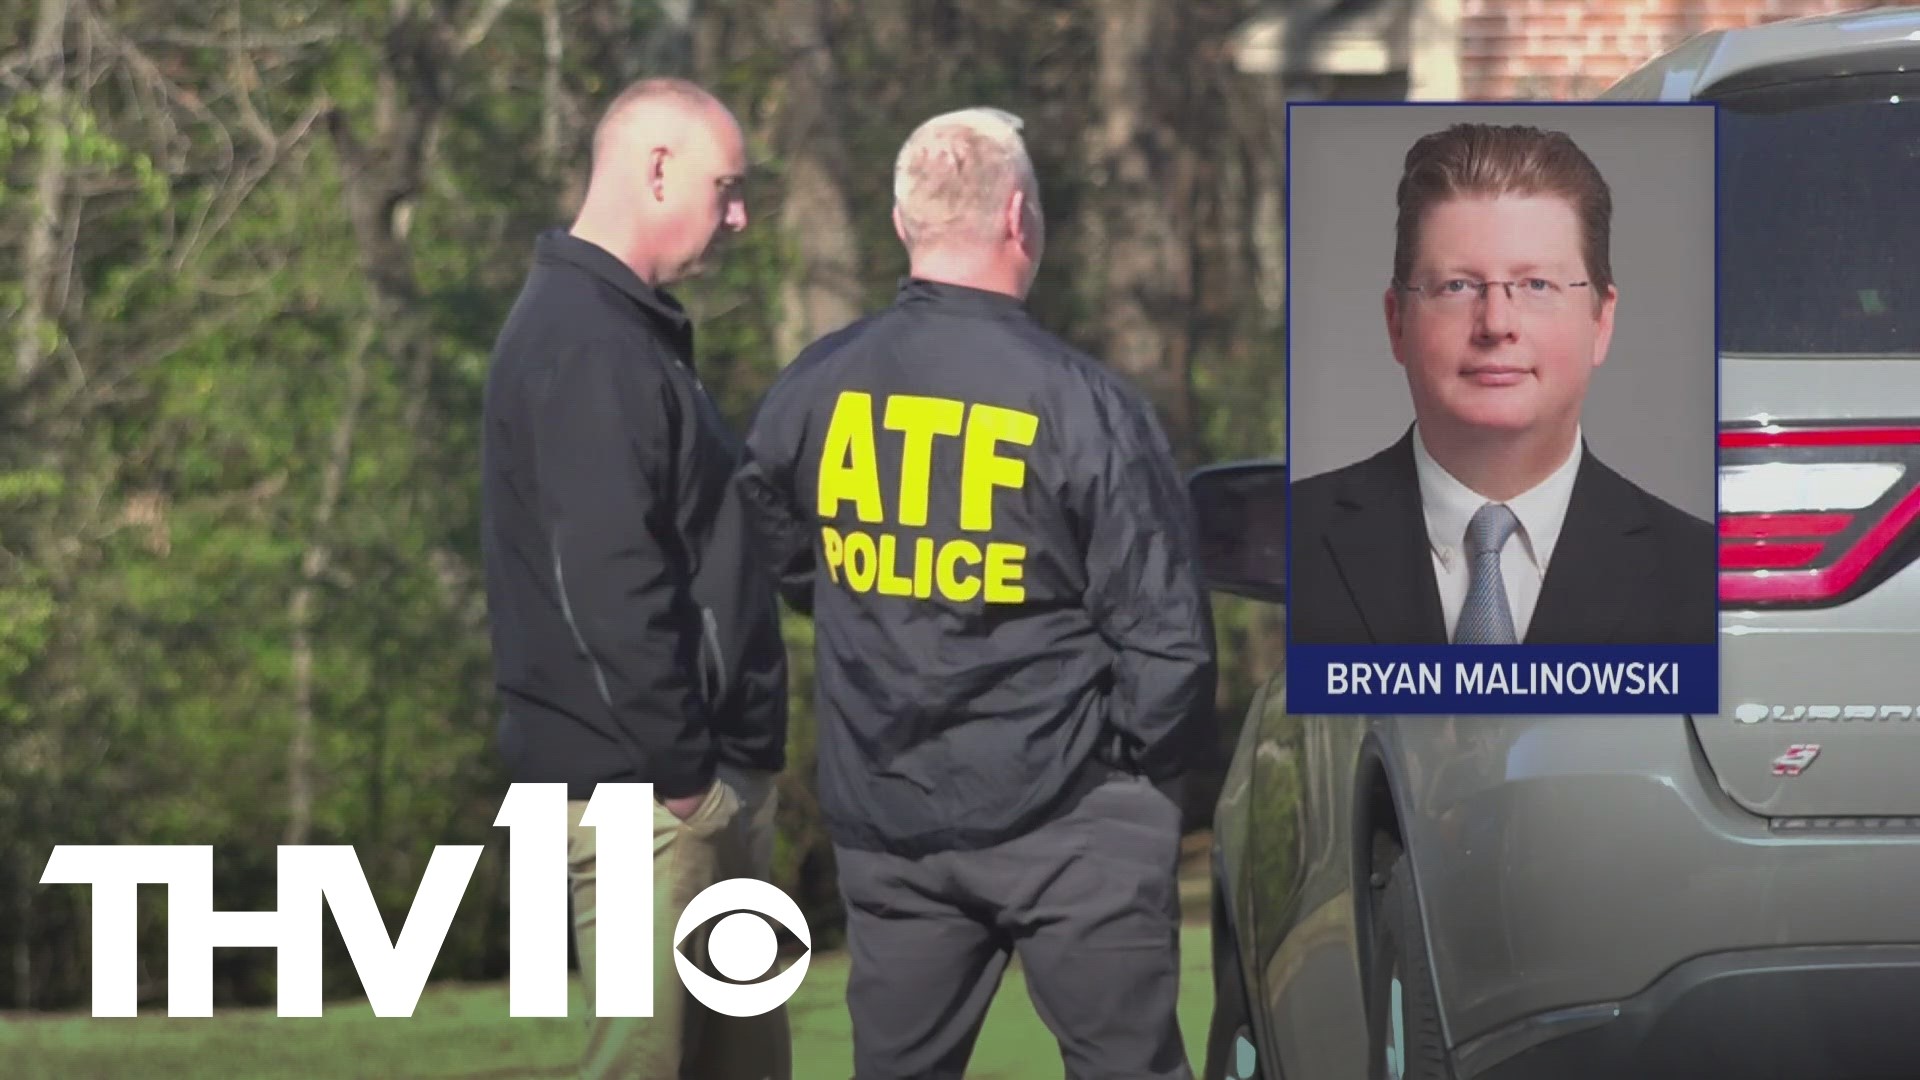 Sens. Tom Cotton and John Boozman say the Dept. of Justice told them ATF agents were not wearing body cameras during the deadly raid on the home of Bryan Malinowski.